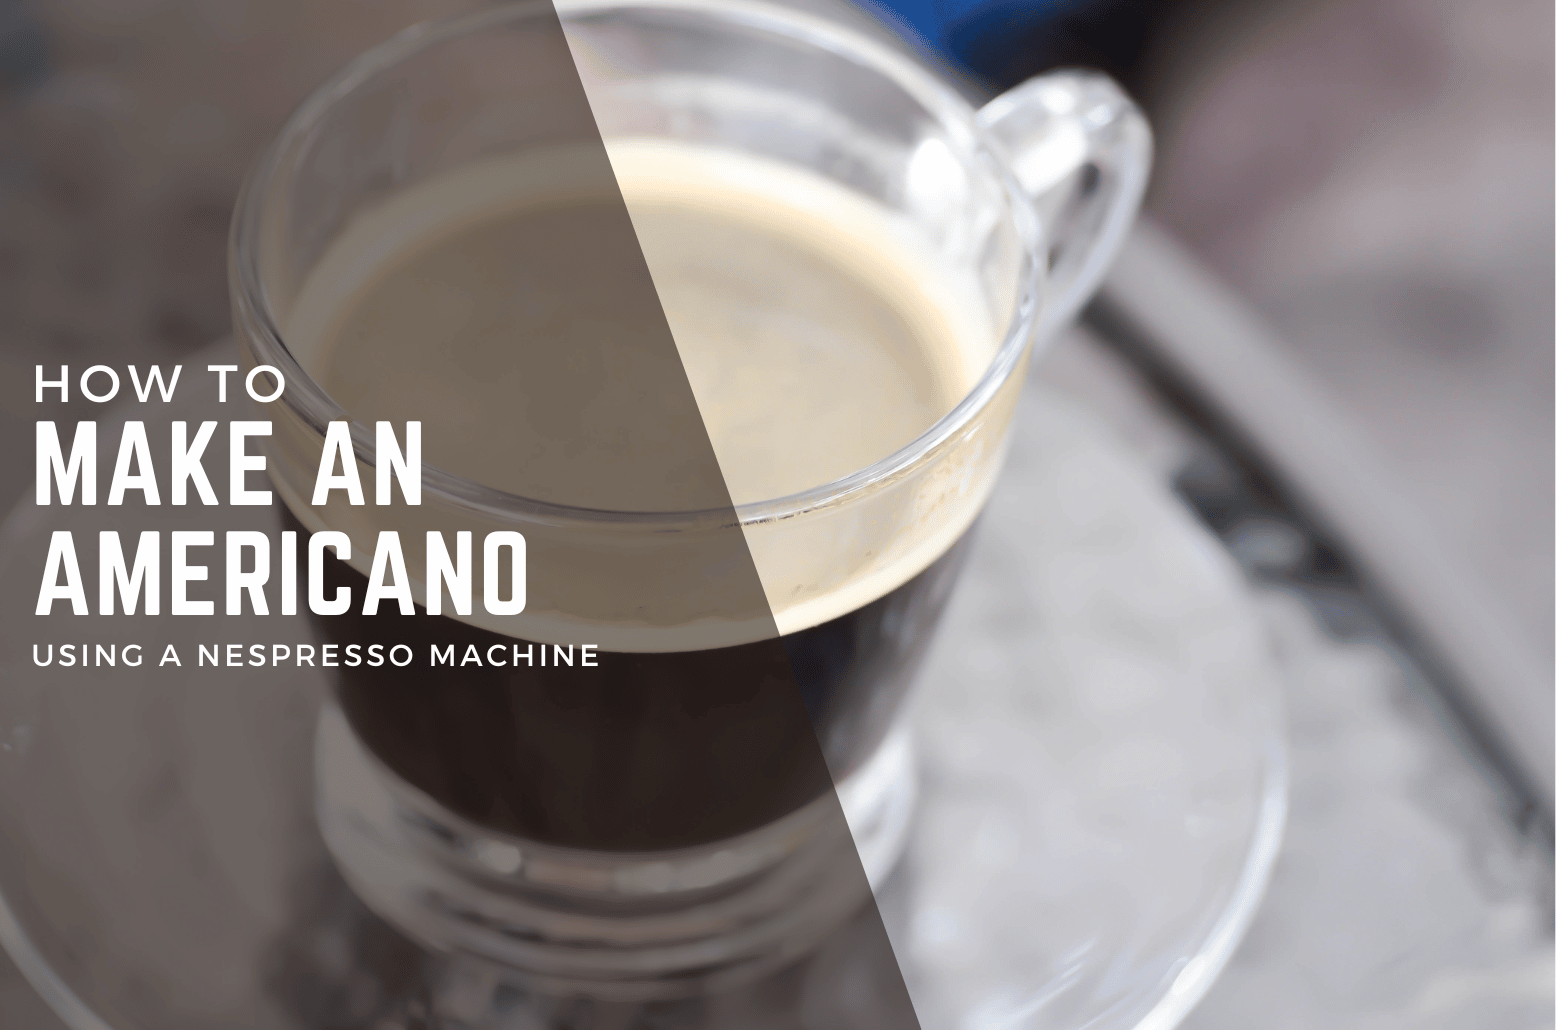 How To Make an Americano Using a Nespresso Machine [The Ultimate Guide]